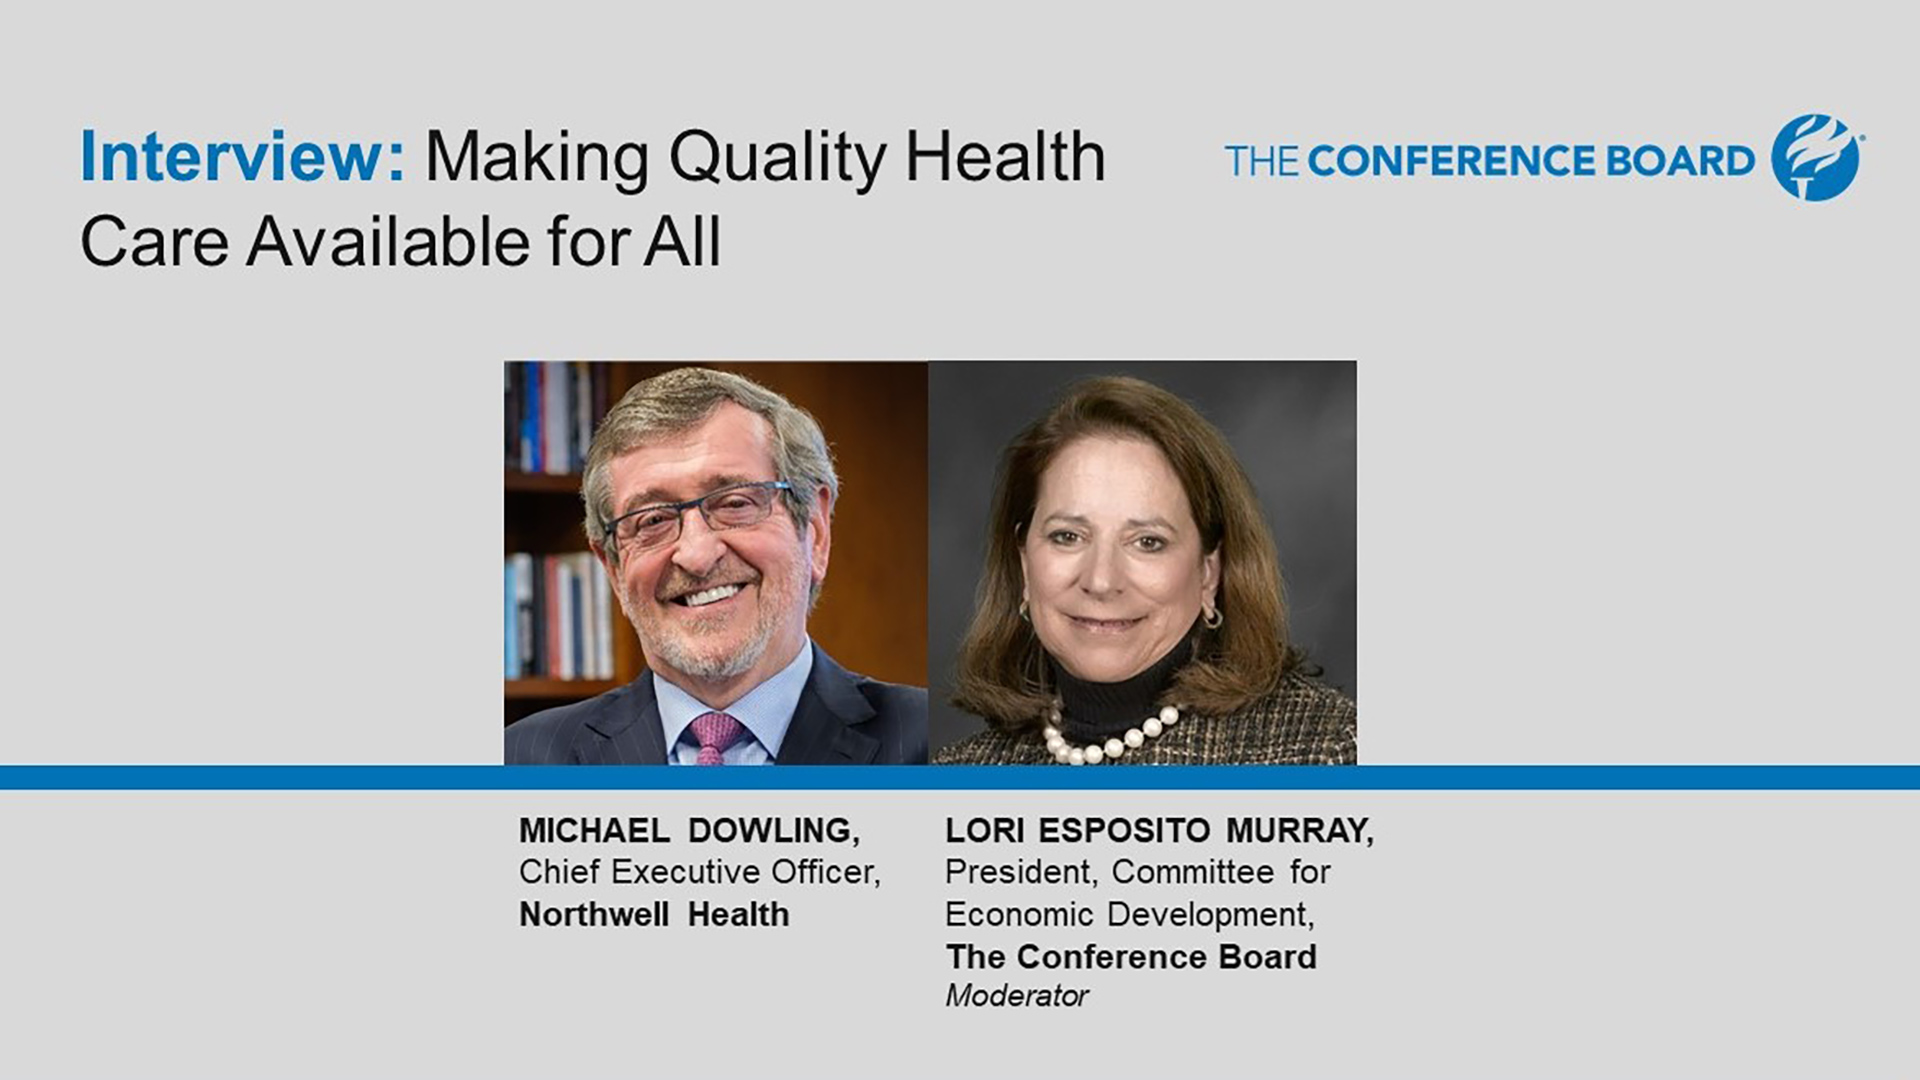 Building a More Civil & Just Society: Session H - Making Quality Health Care Available for All. 21 Mins